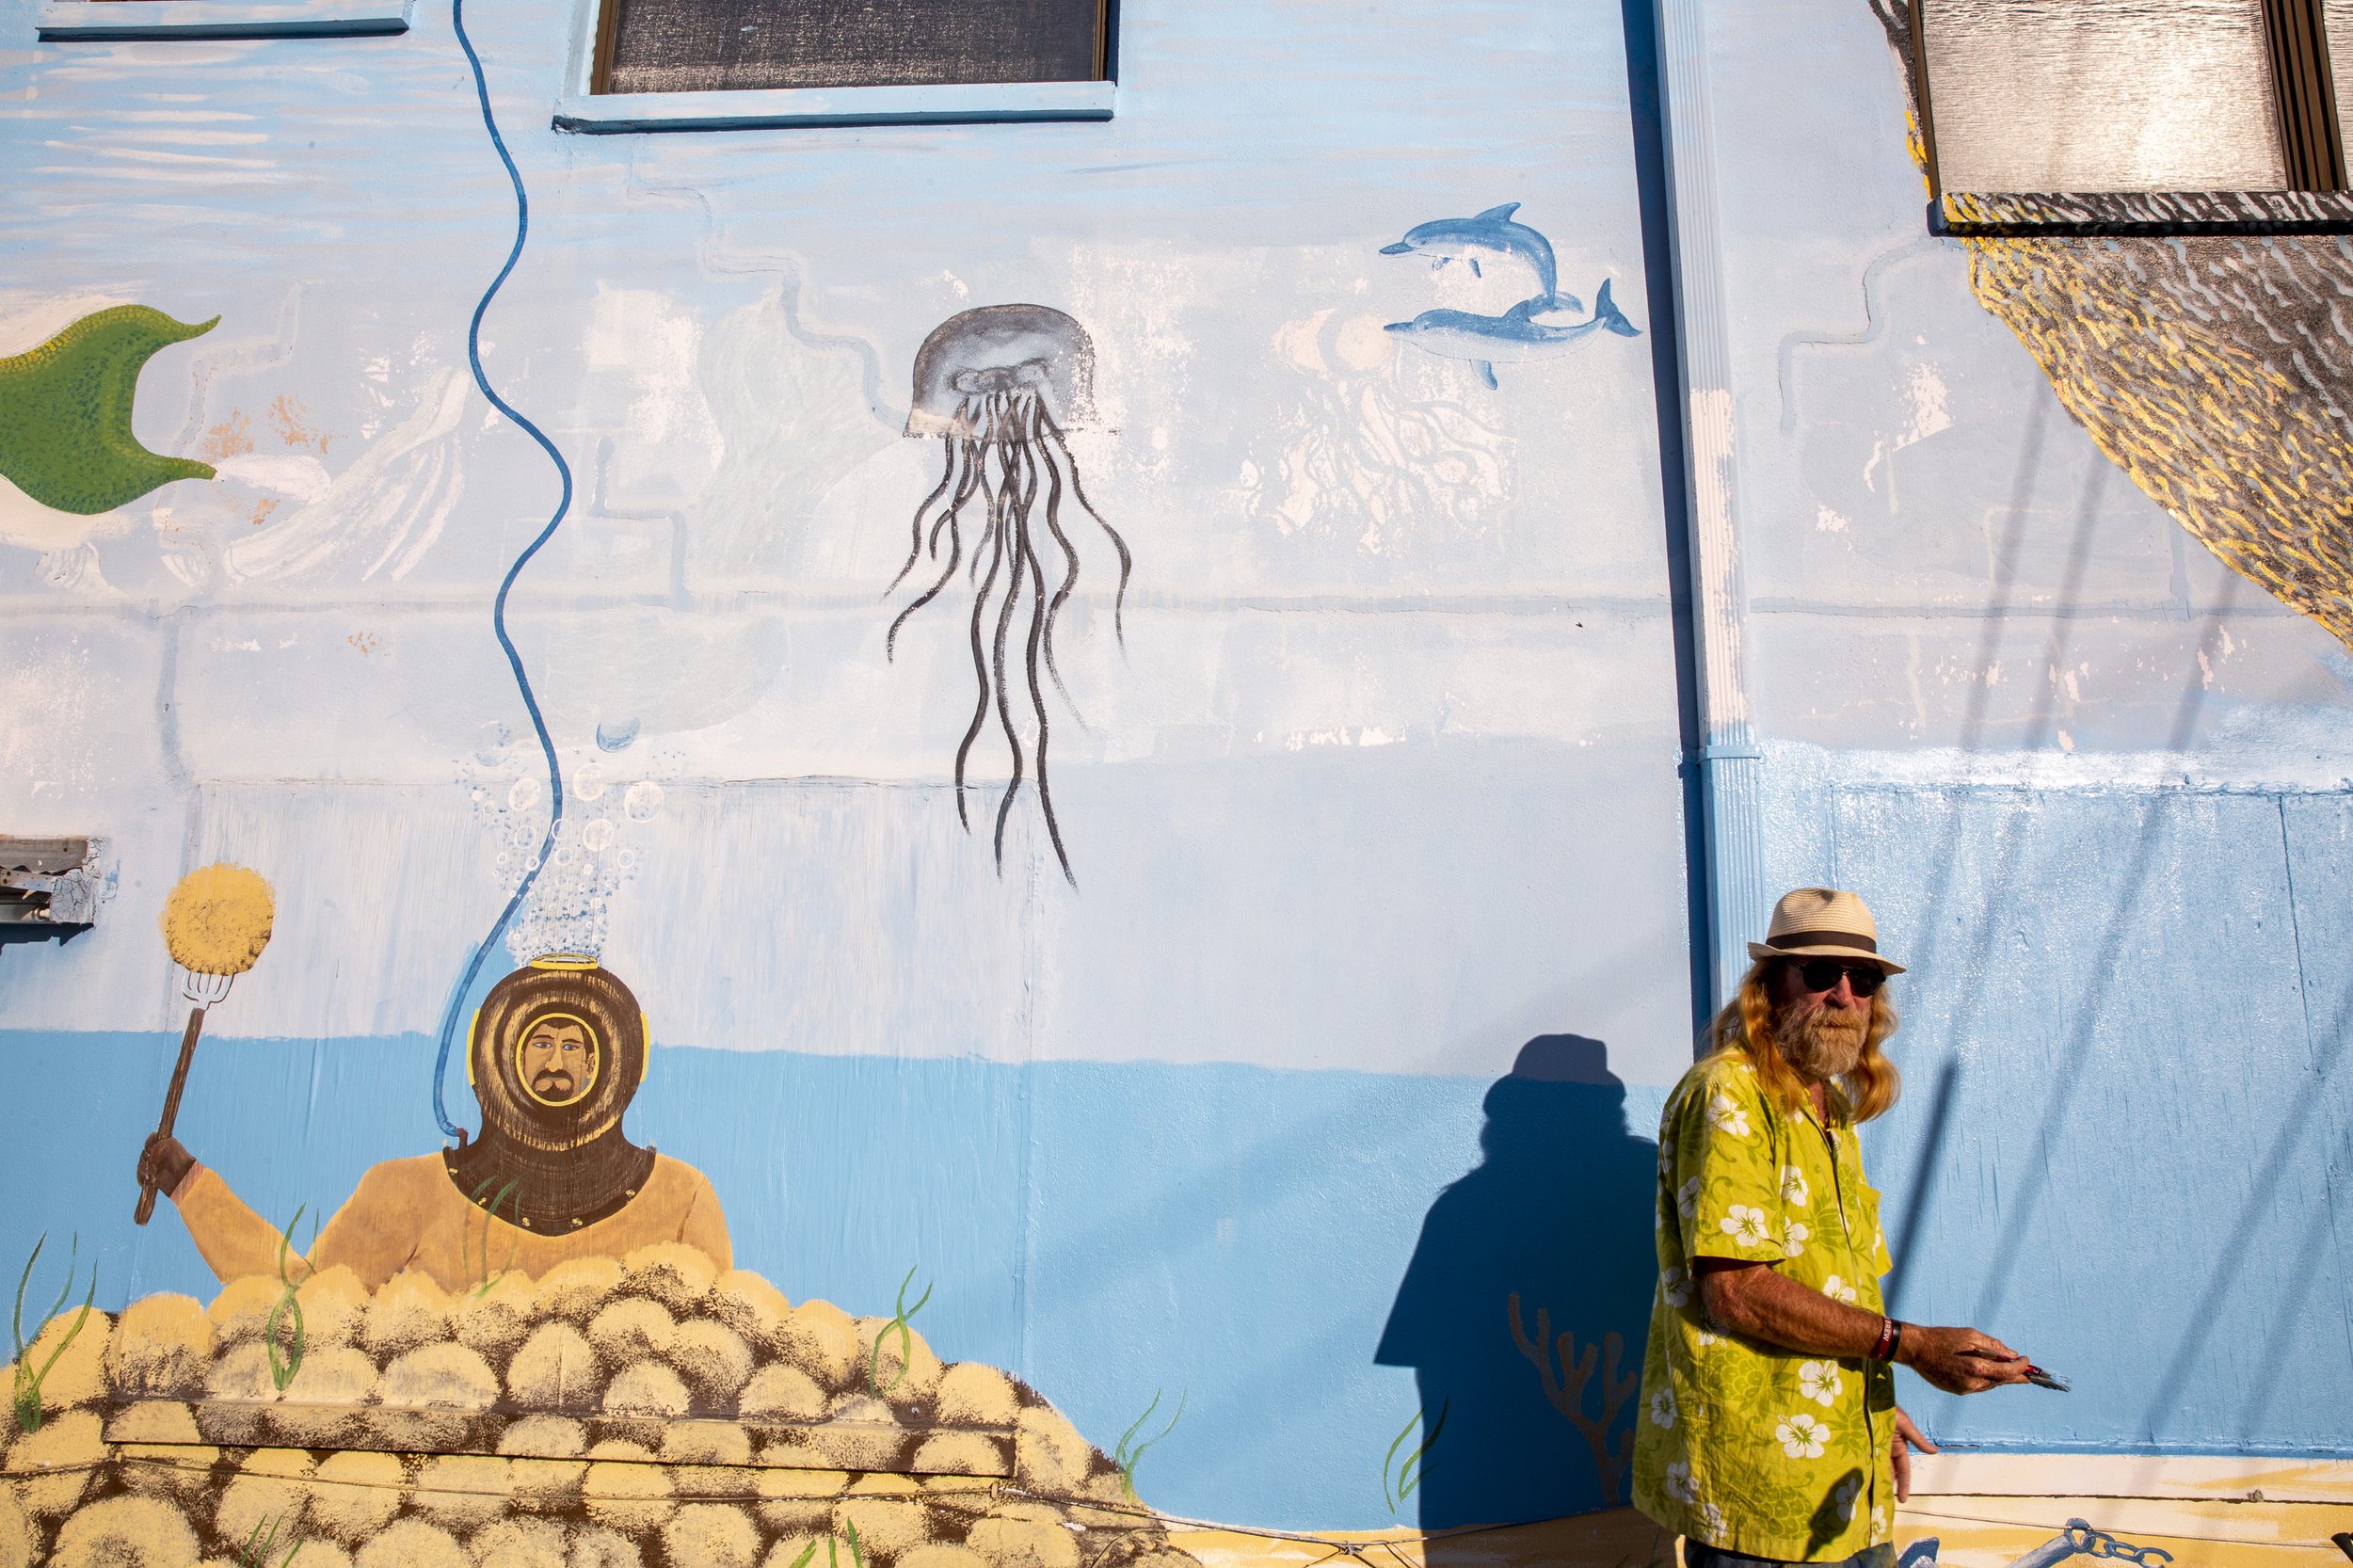  Local artist Mark DiClemente touches up a mural he first painted about 10 years ago in Tarpon Springs on Saturday, Dec. 19, 2020.  